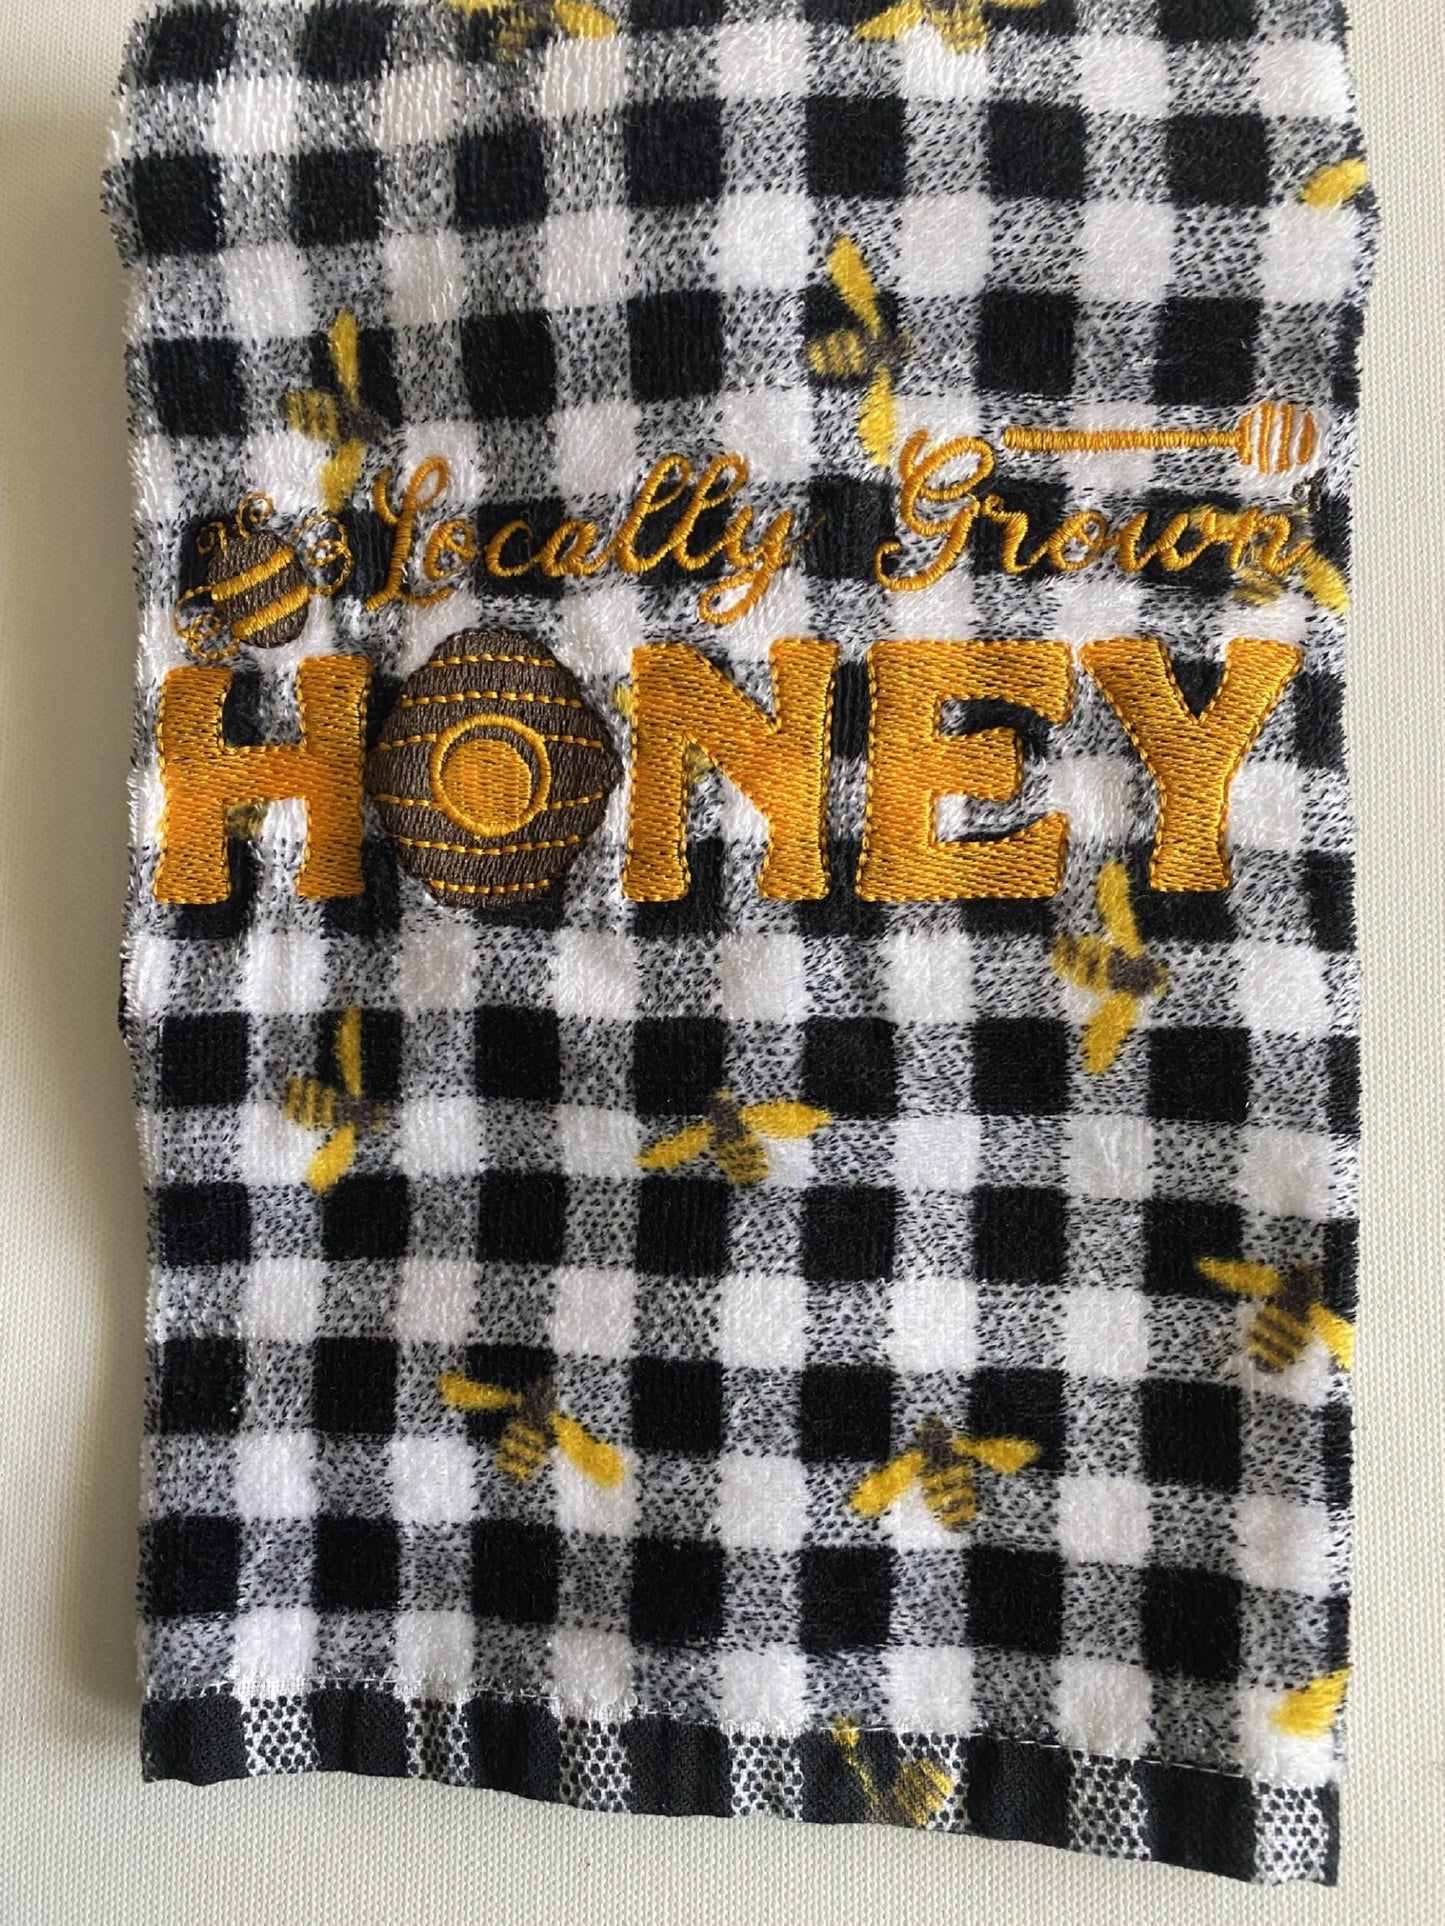 Locally Grown Honey-Machine Embroidered Towel-Black & White Check w/bees